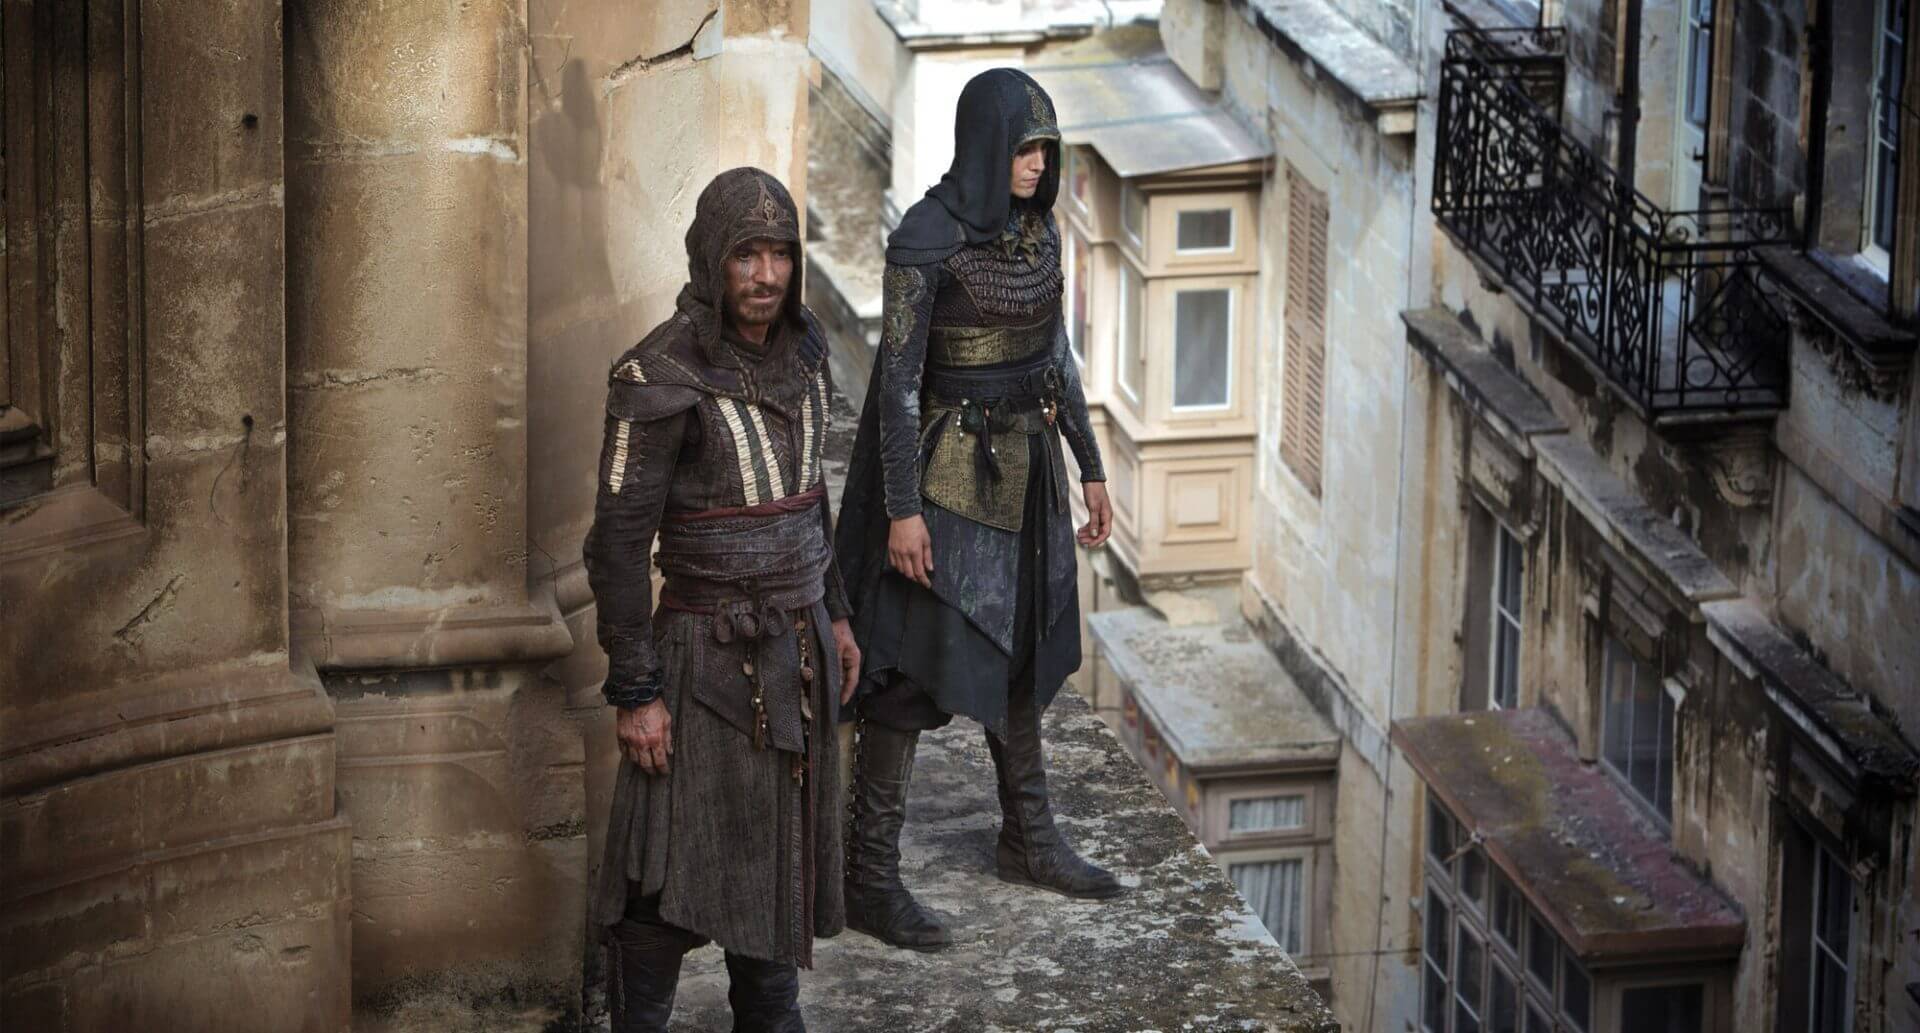 Assassin's Creed, Trailer Oficial 2